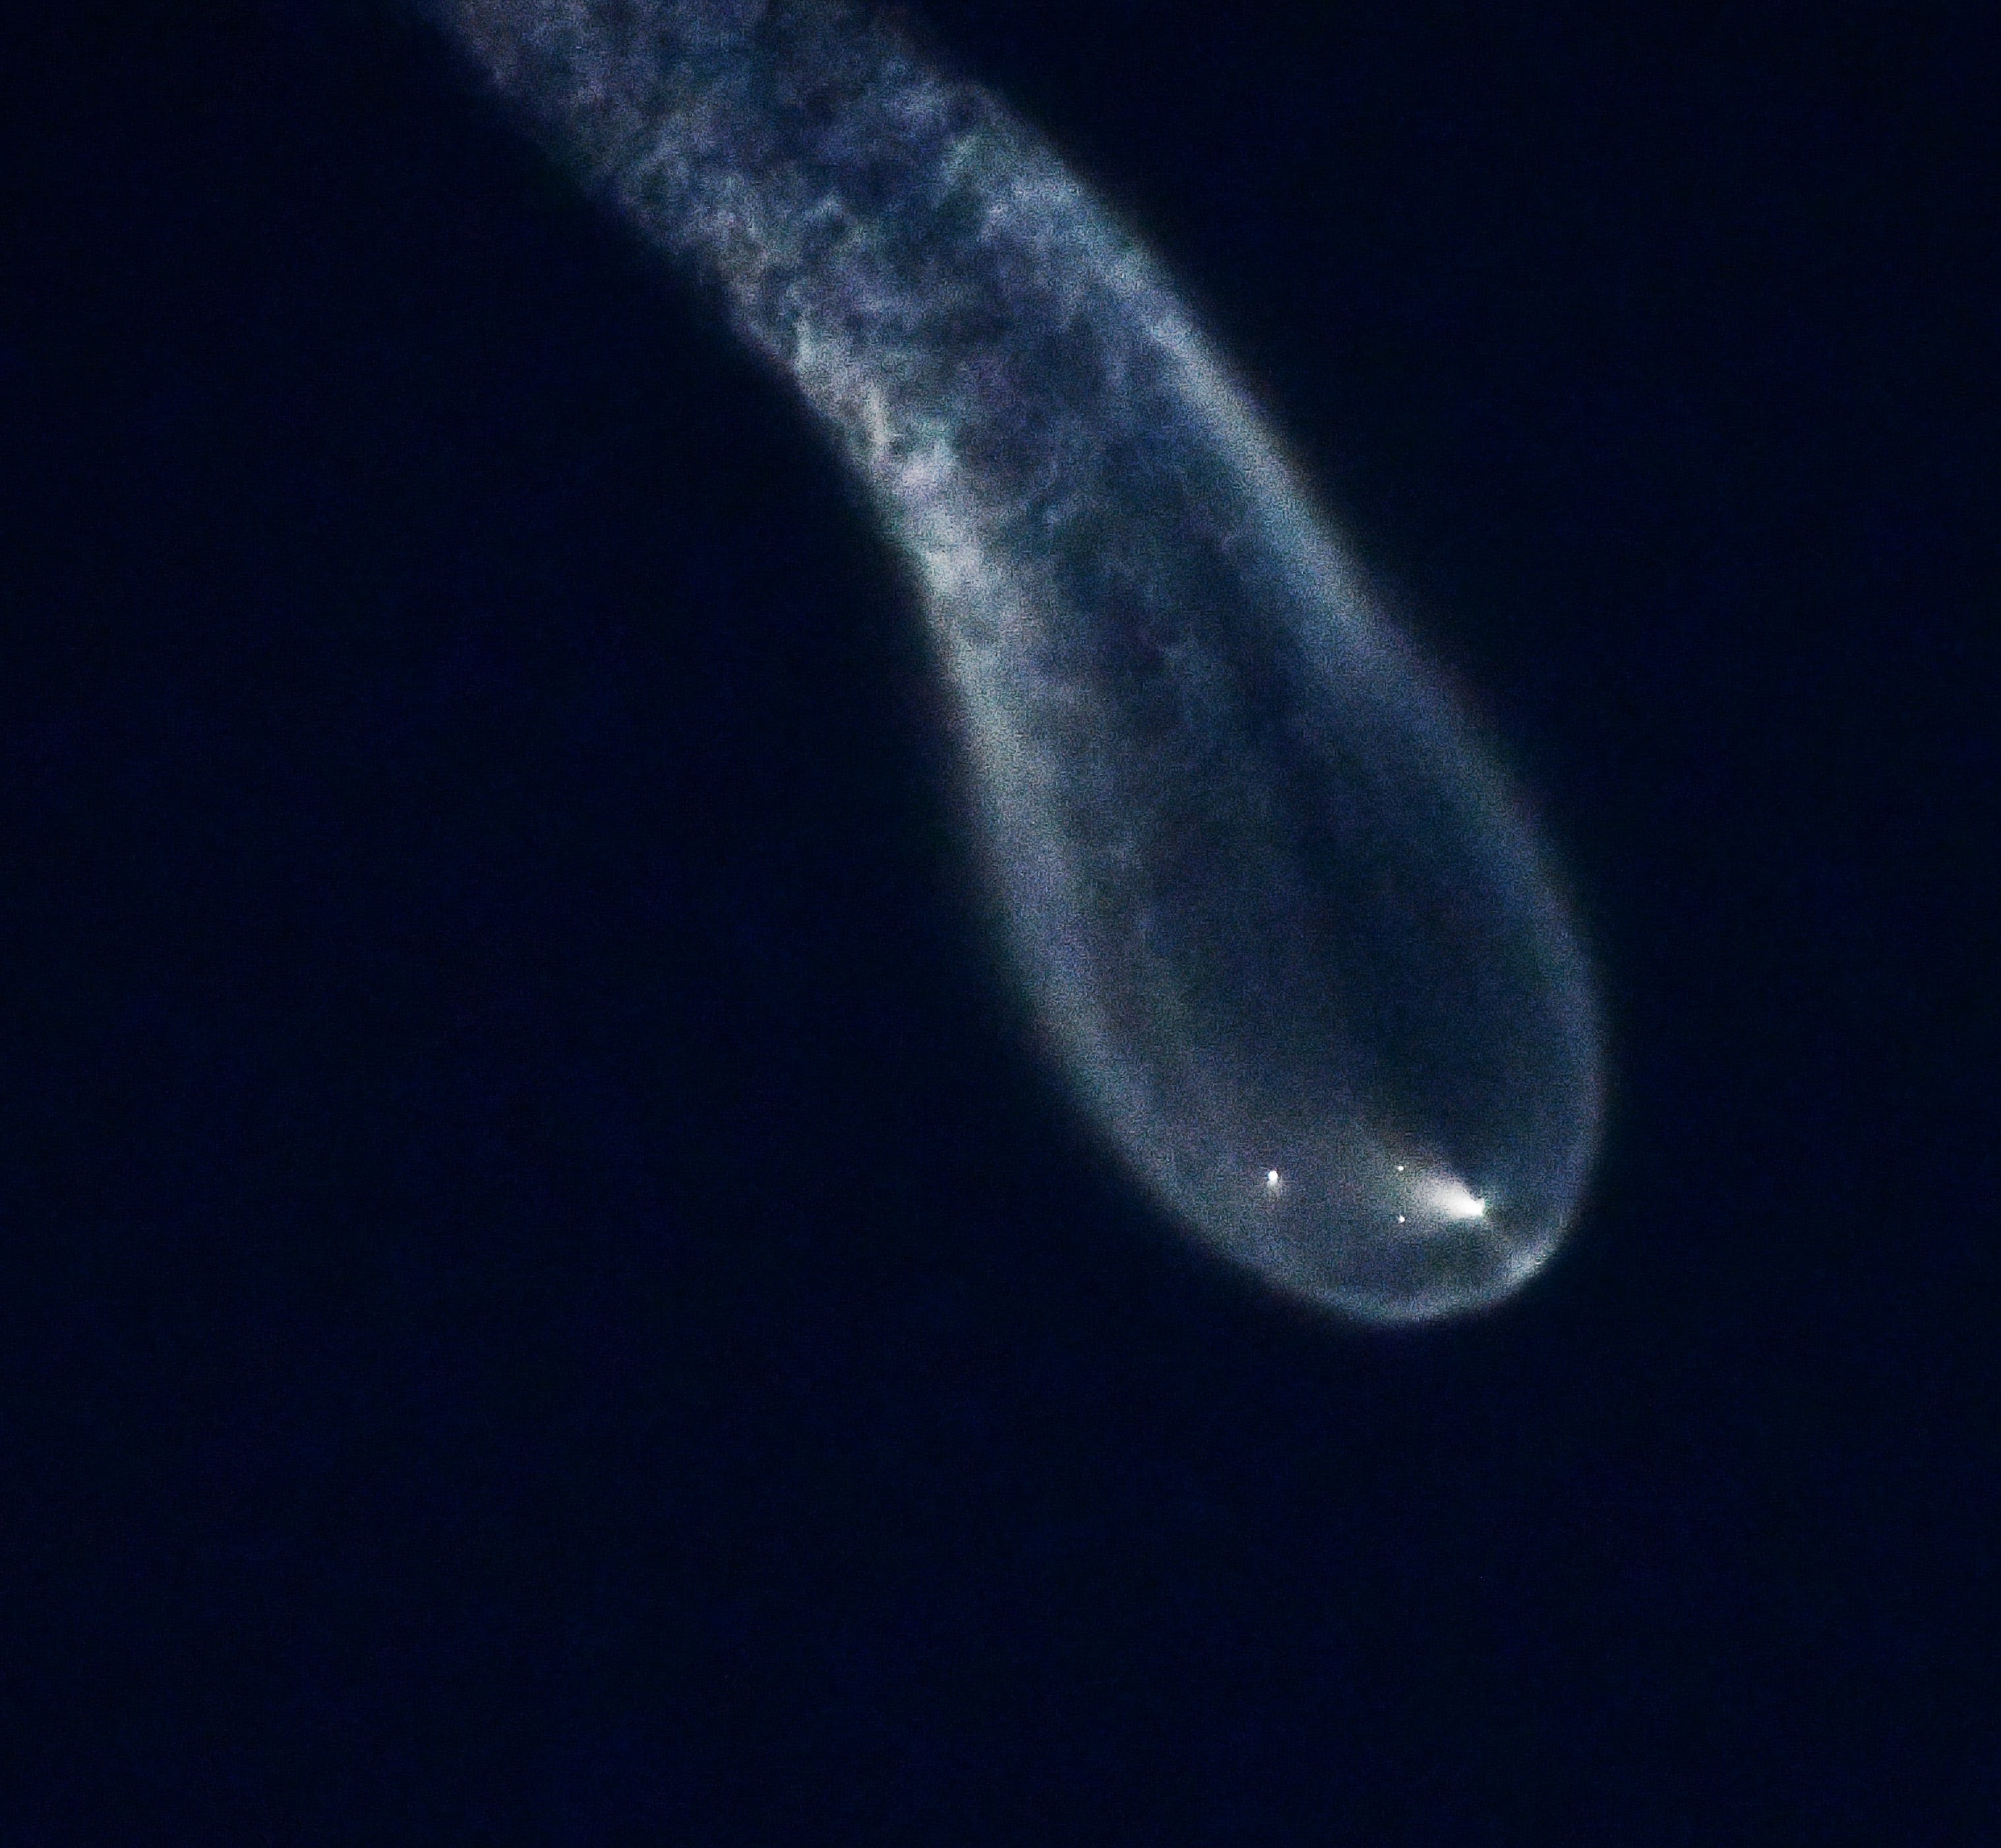 Jellyfish in the sky: SpaceX launches Falcon 9 Friday from Cape Canaveral, Florida